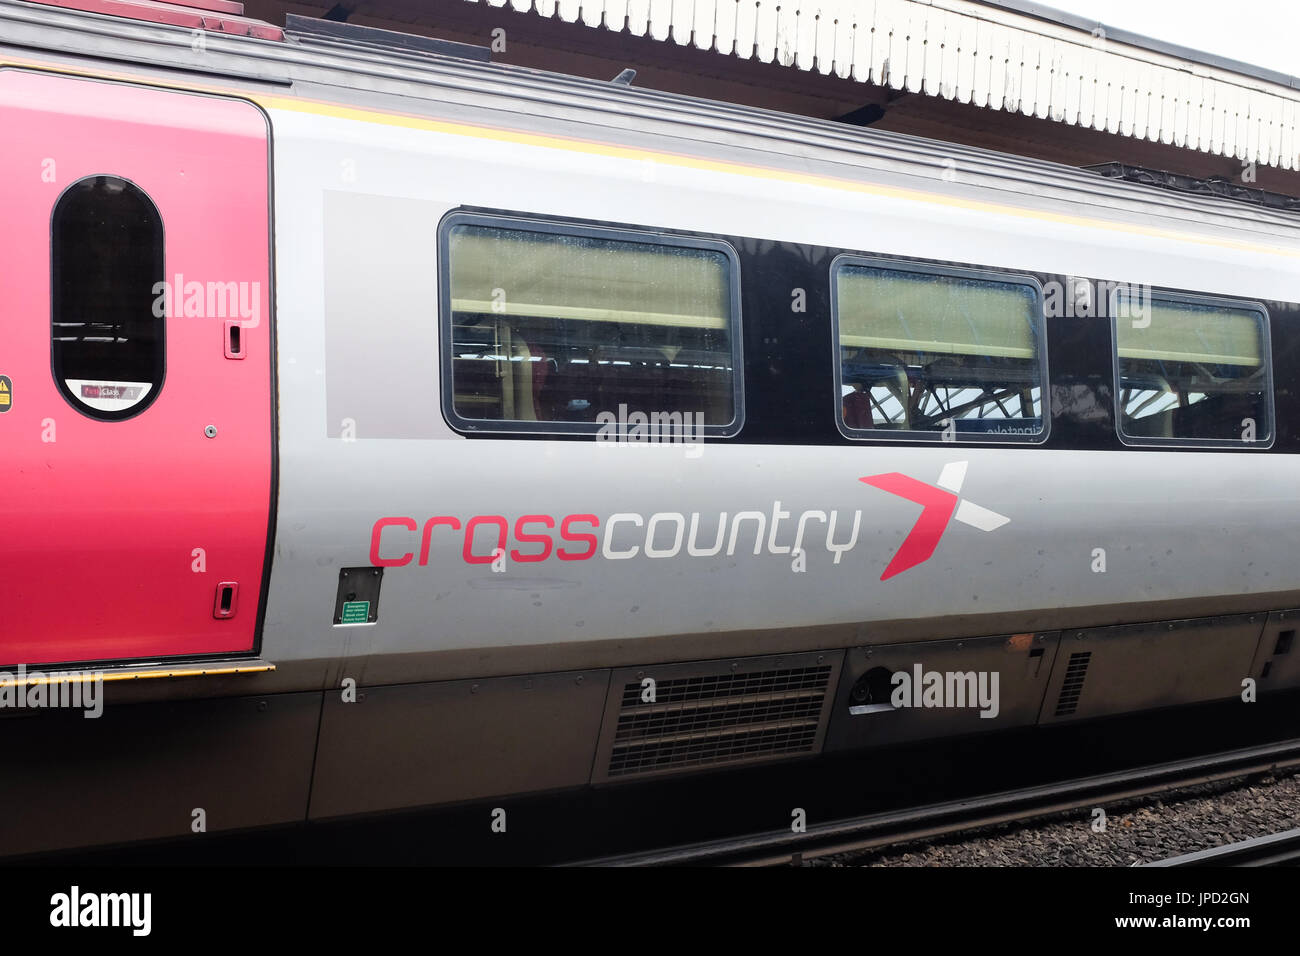 A CrossCountry train operated by Arriva UK Trains. Stock Photo